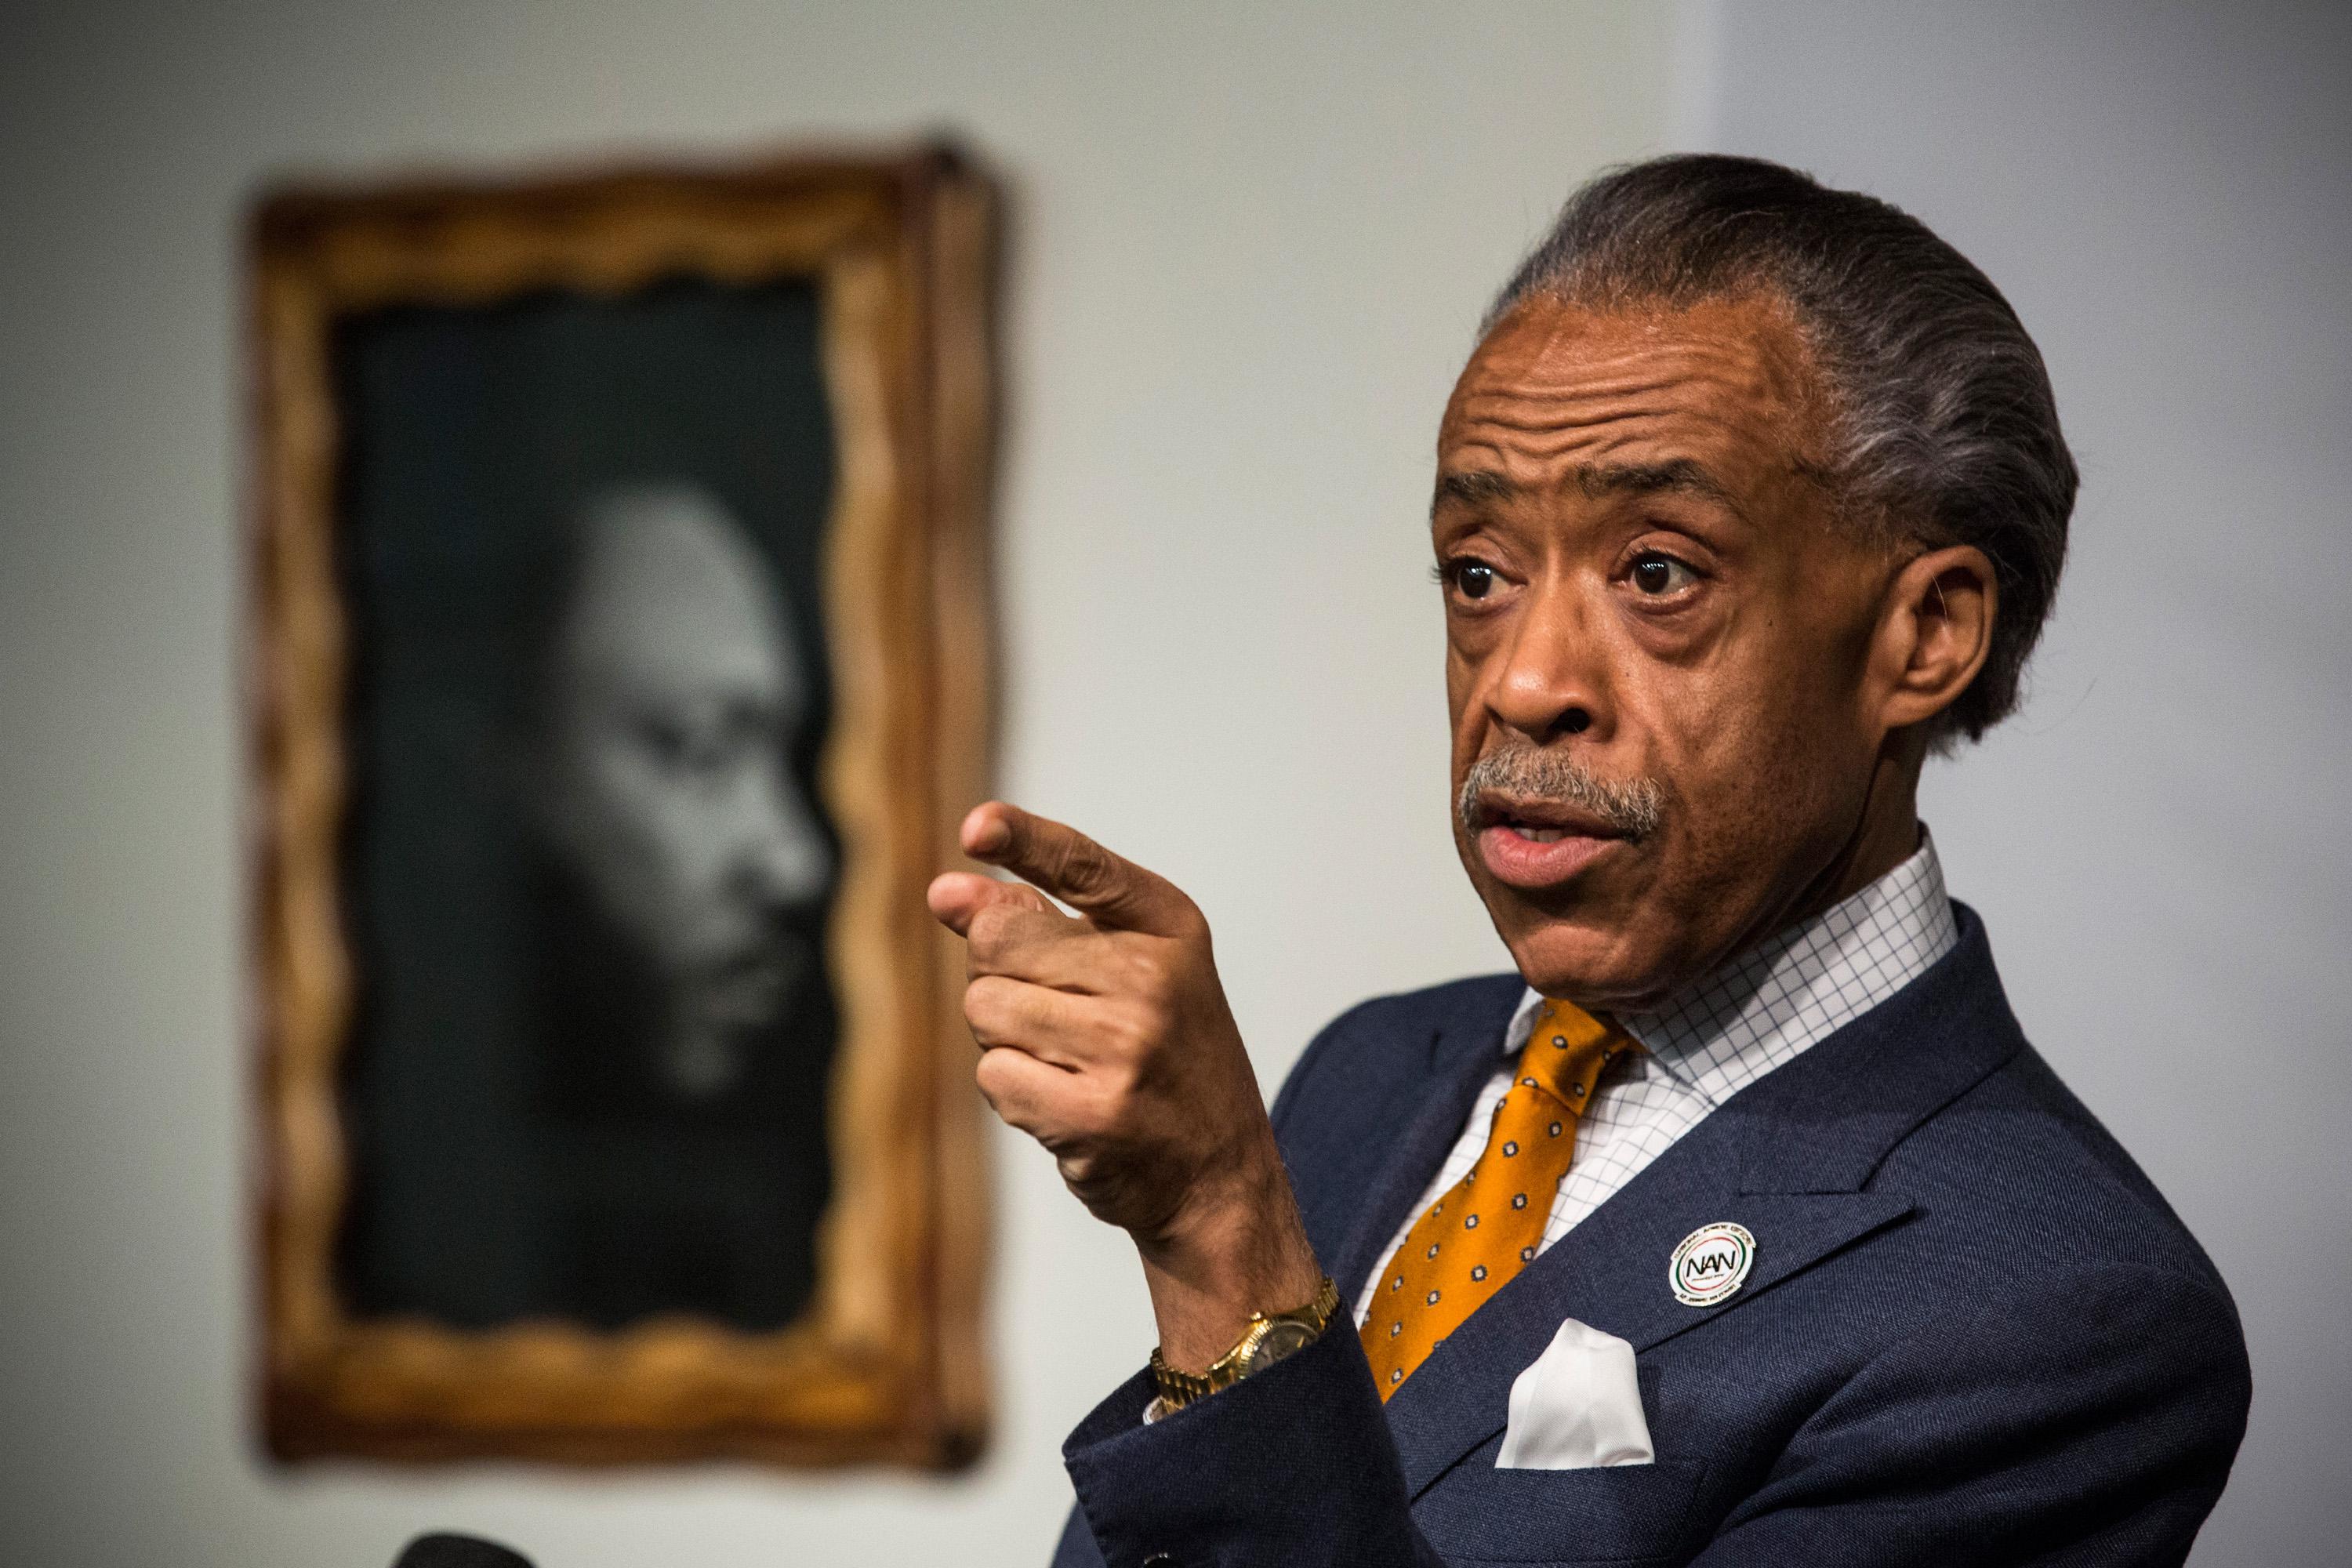 Rev. Al Sharpton Holds News Conference At National Action Network's Office